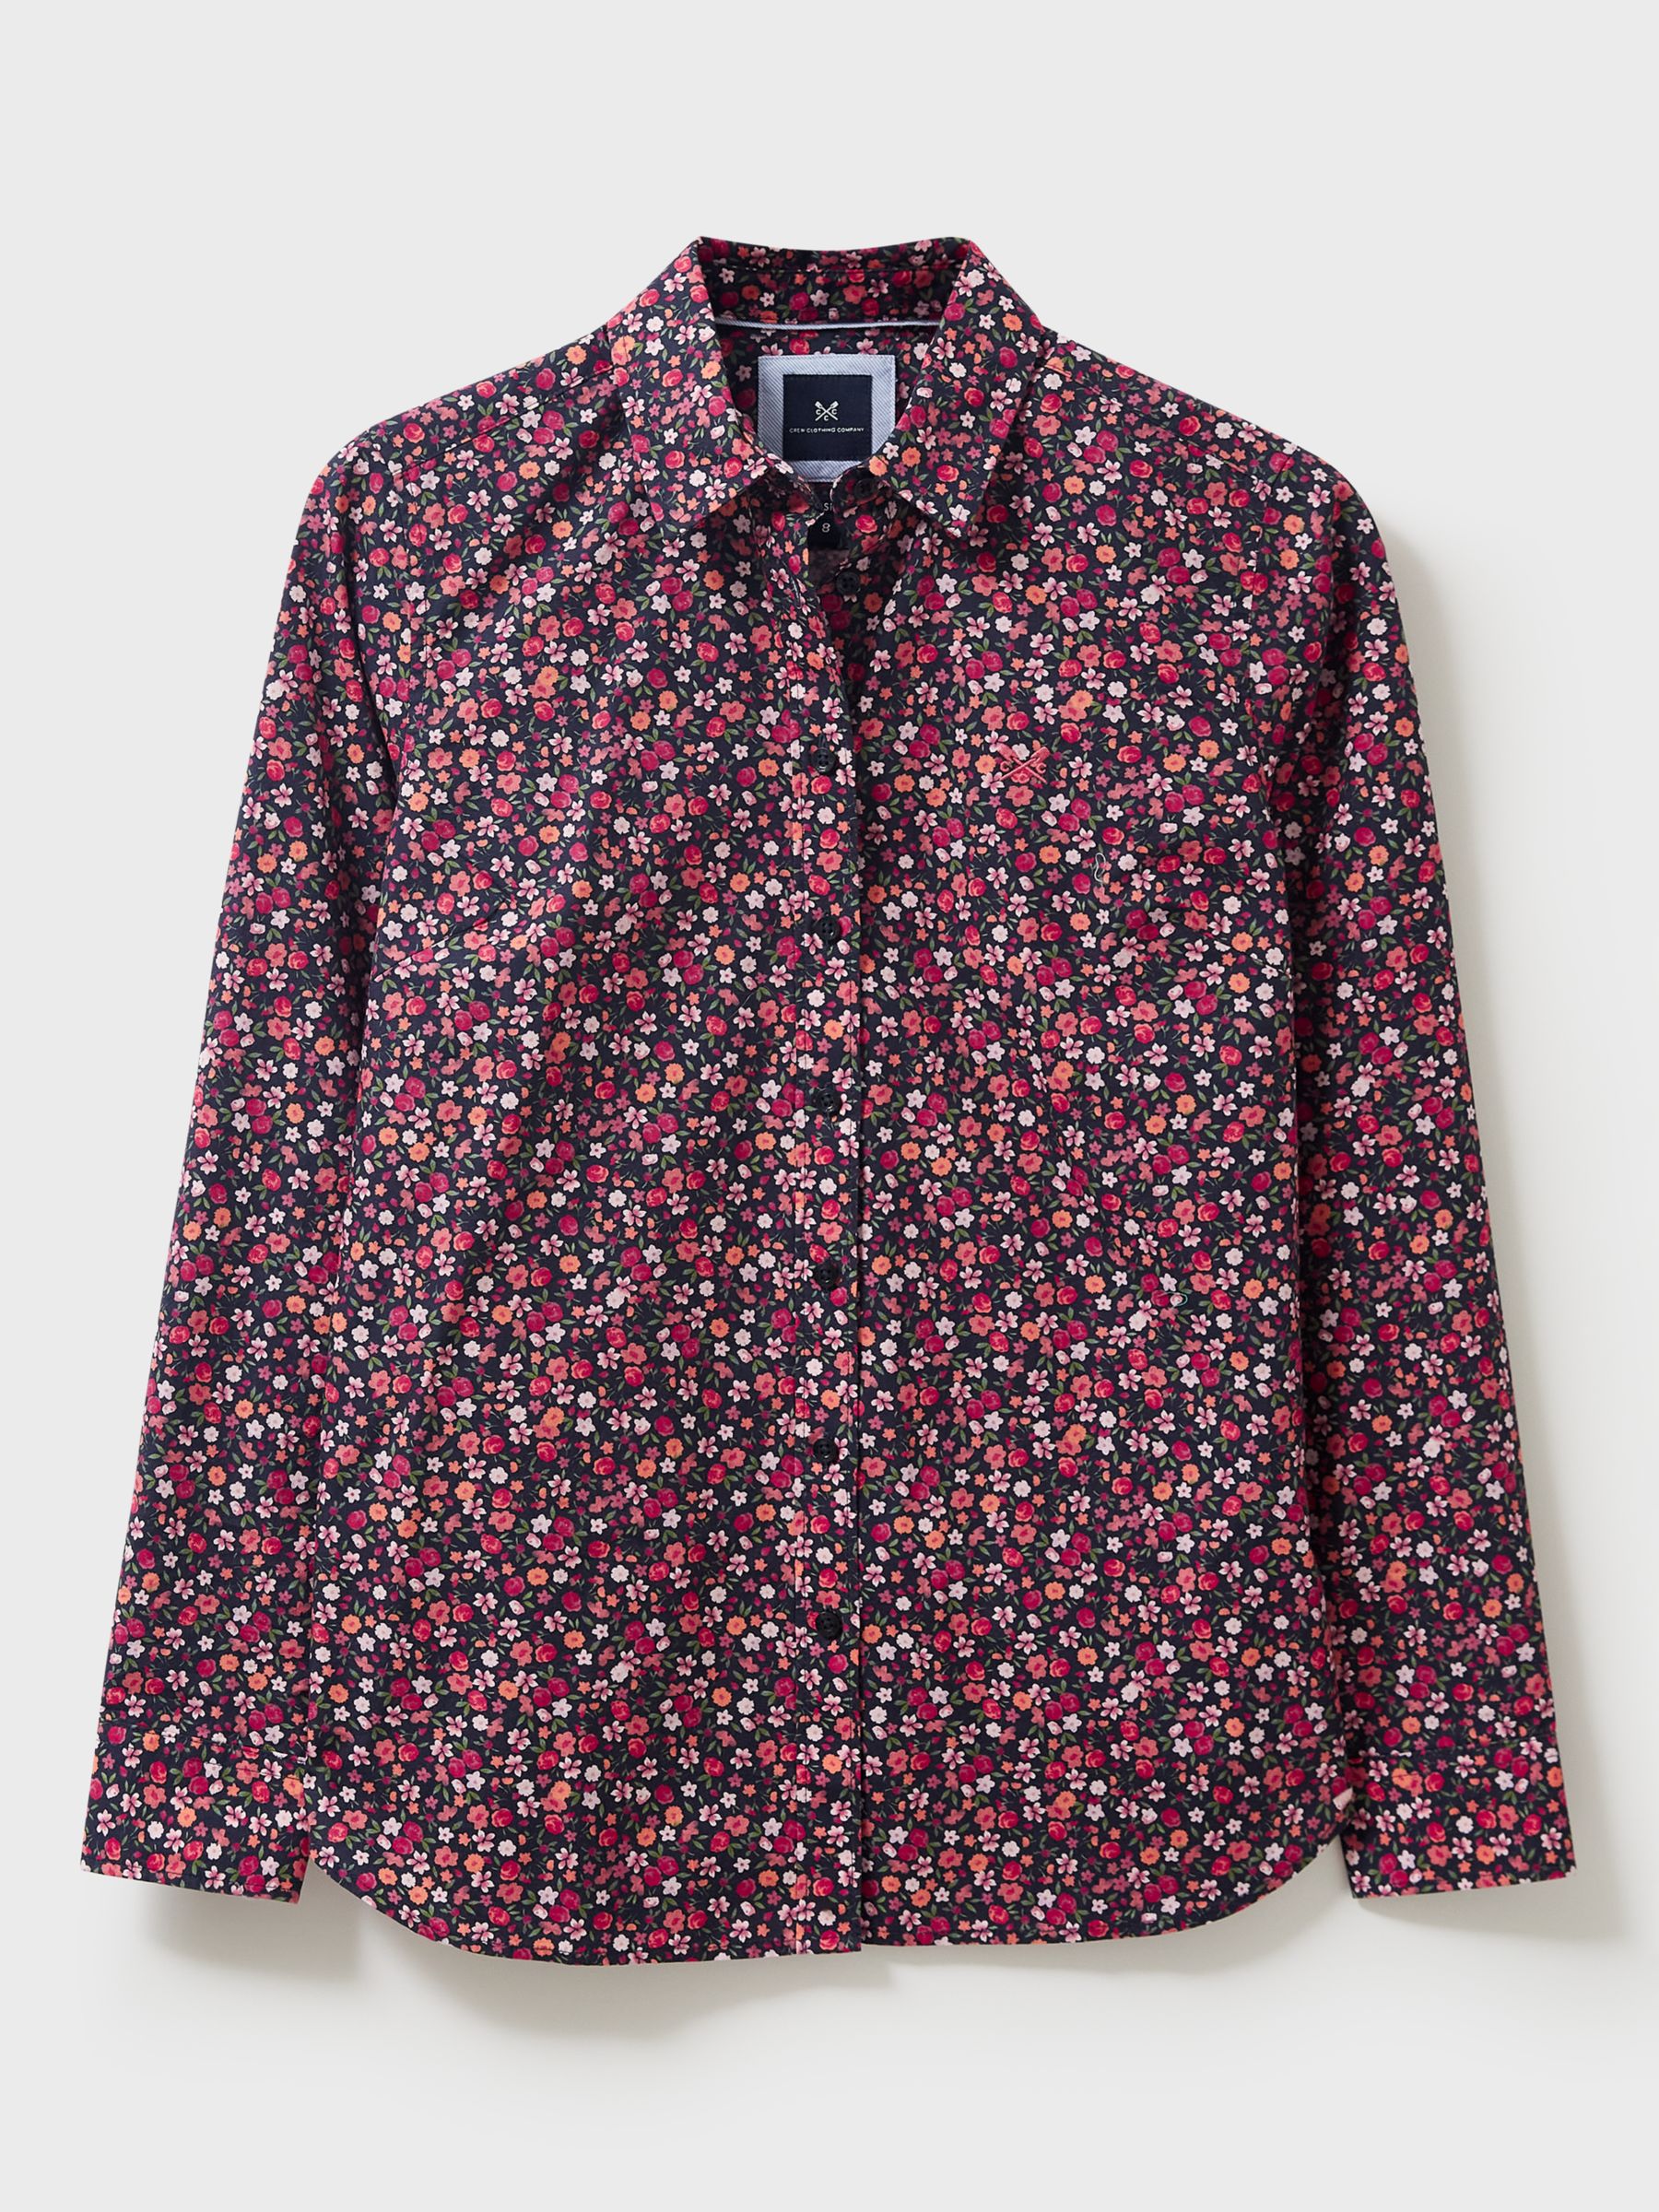 Crew Clothing Lulworth Floral Shirt, Navy Blue at John Lewis & Partners